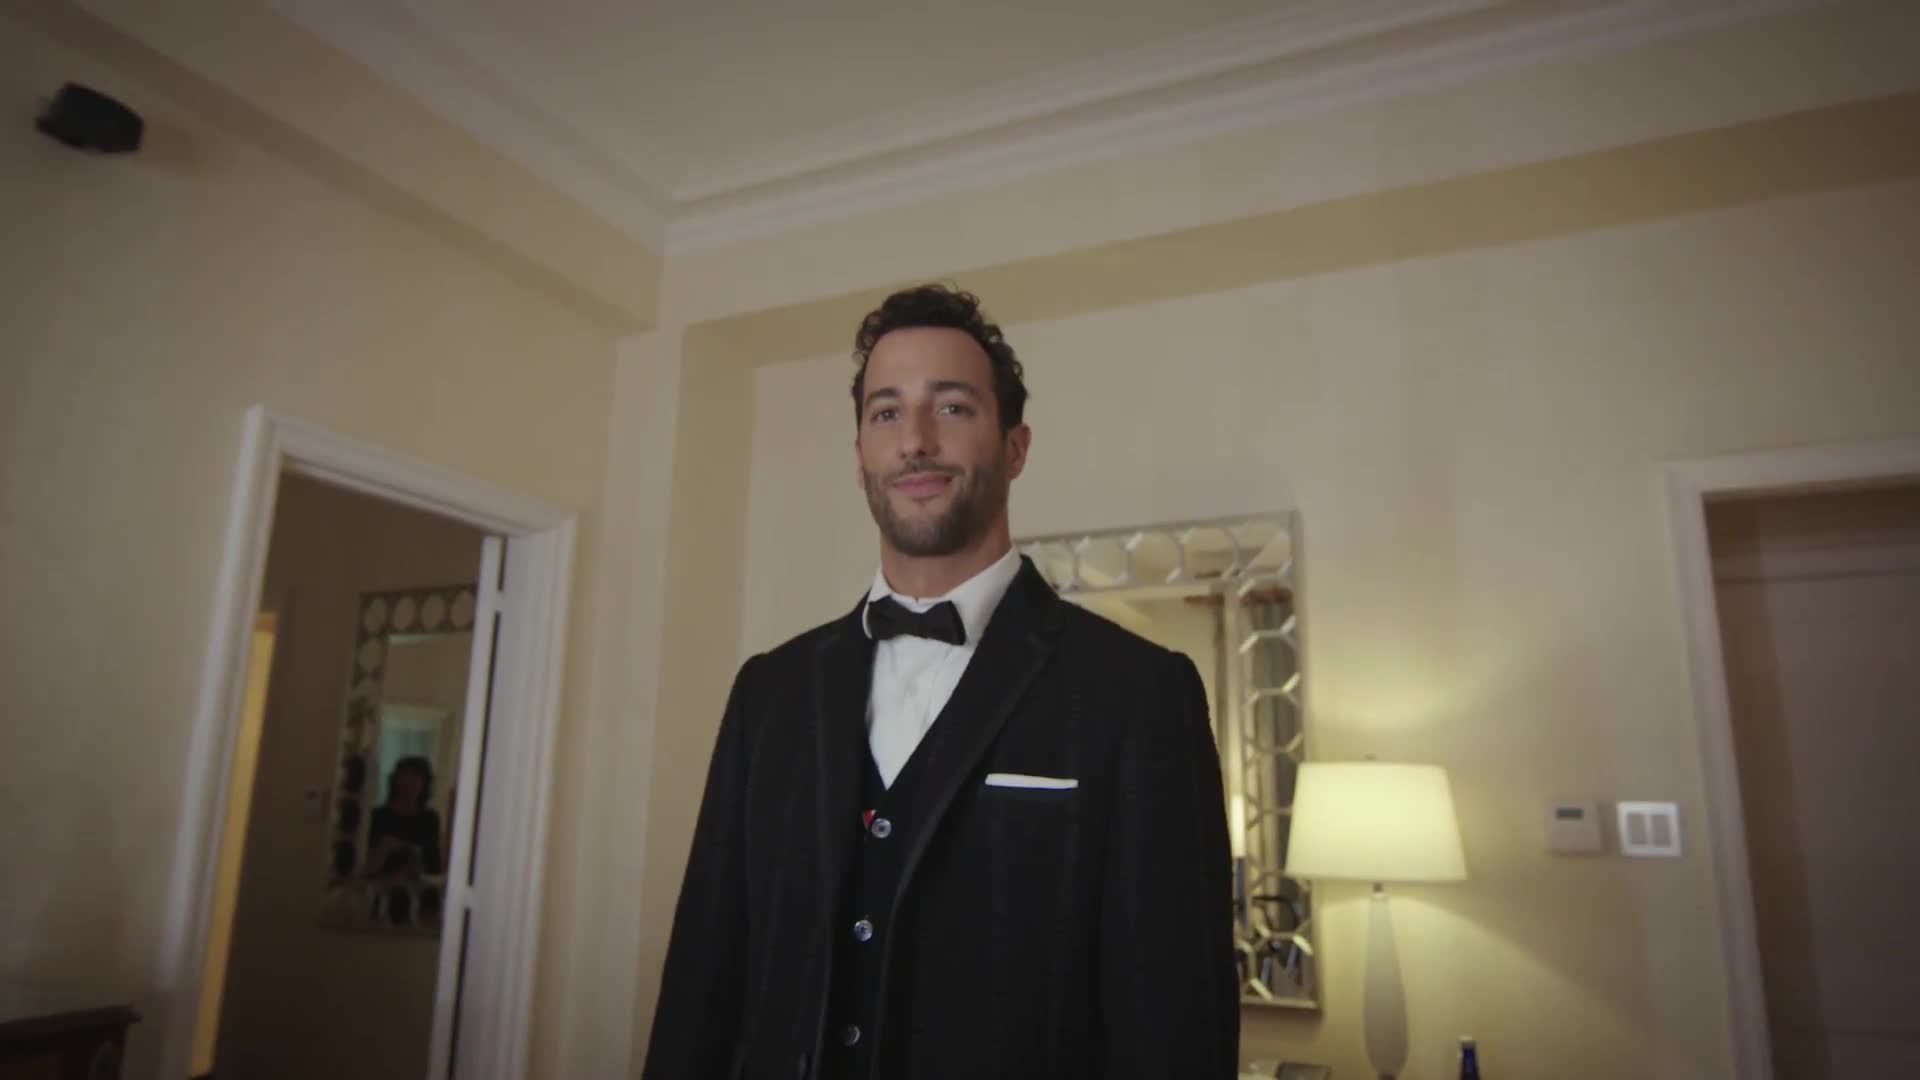 Watch How Formula One Driver Daniel Ricciardo Geared Up For His First ...